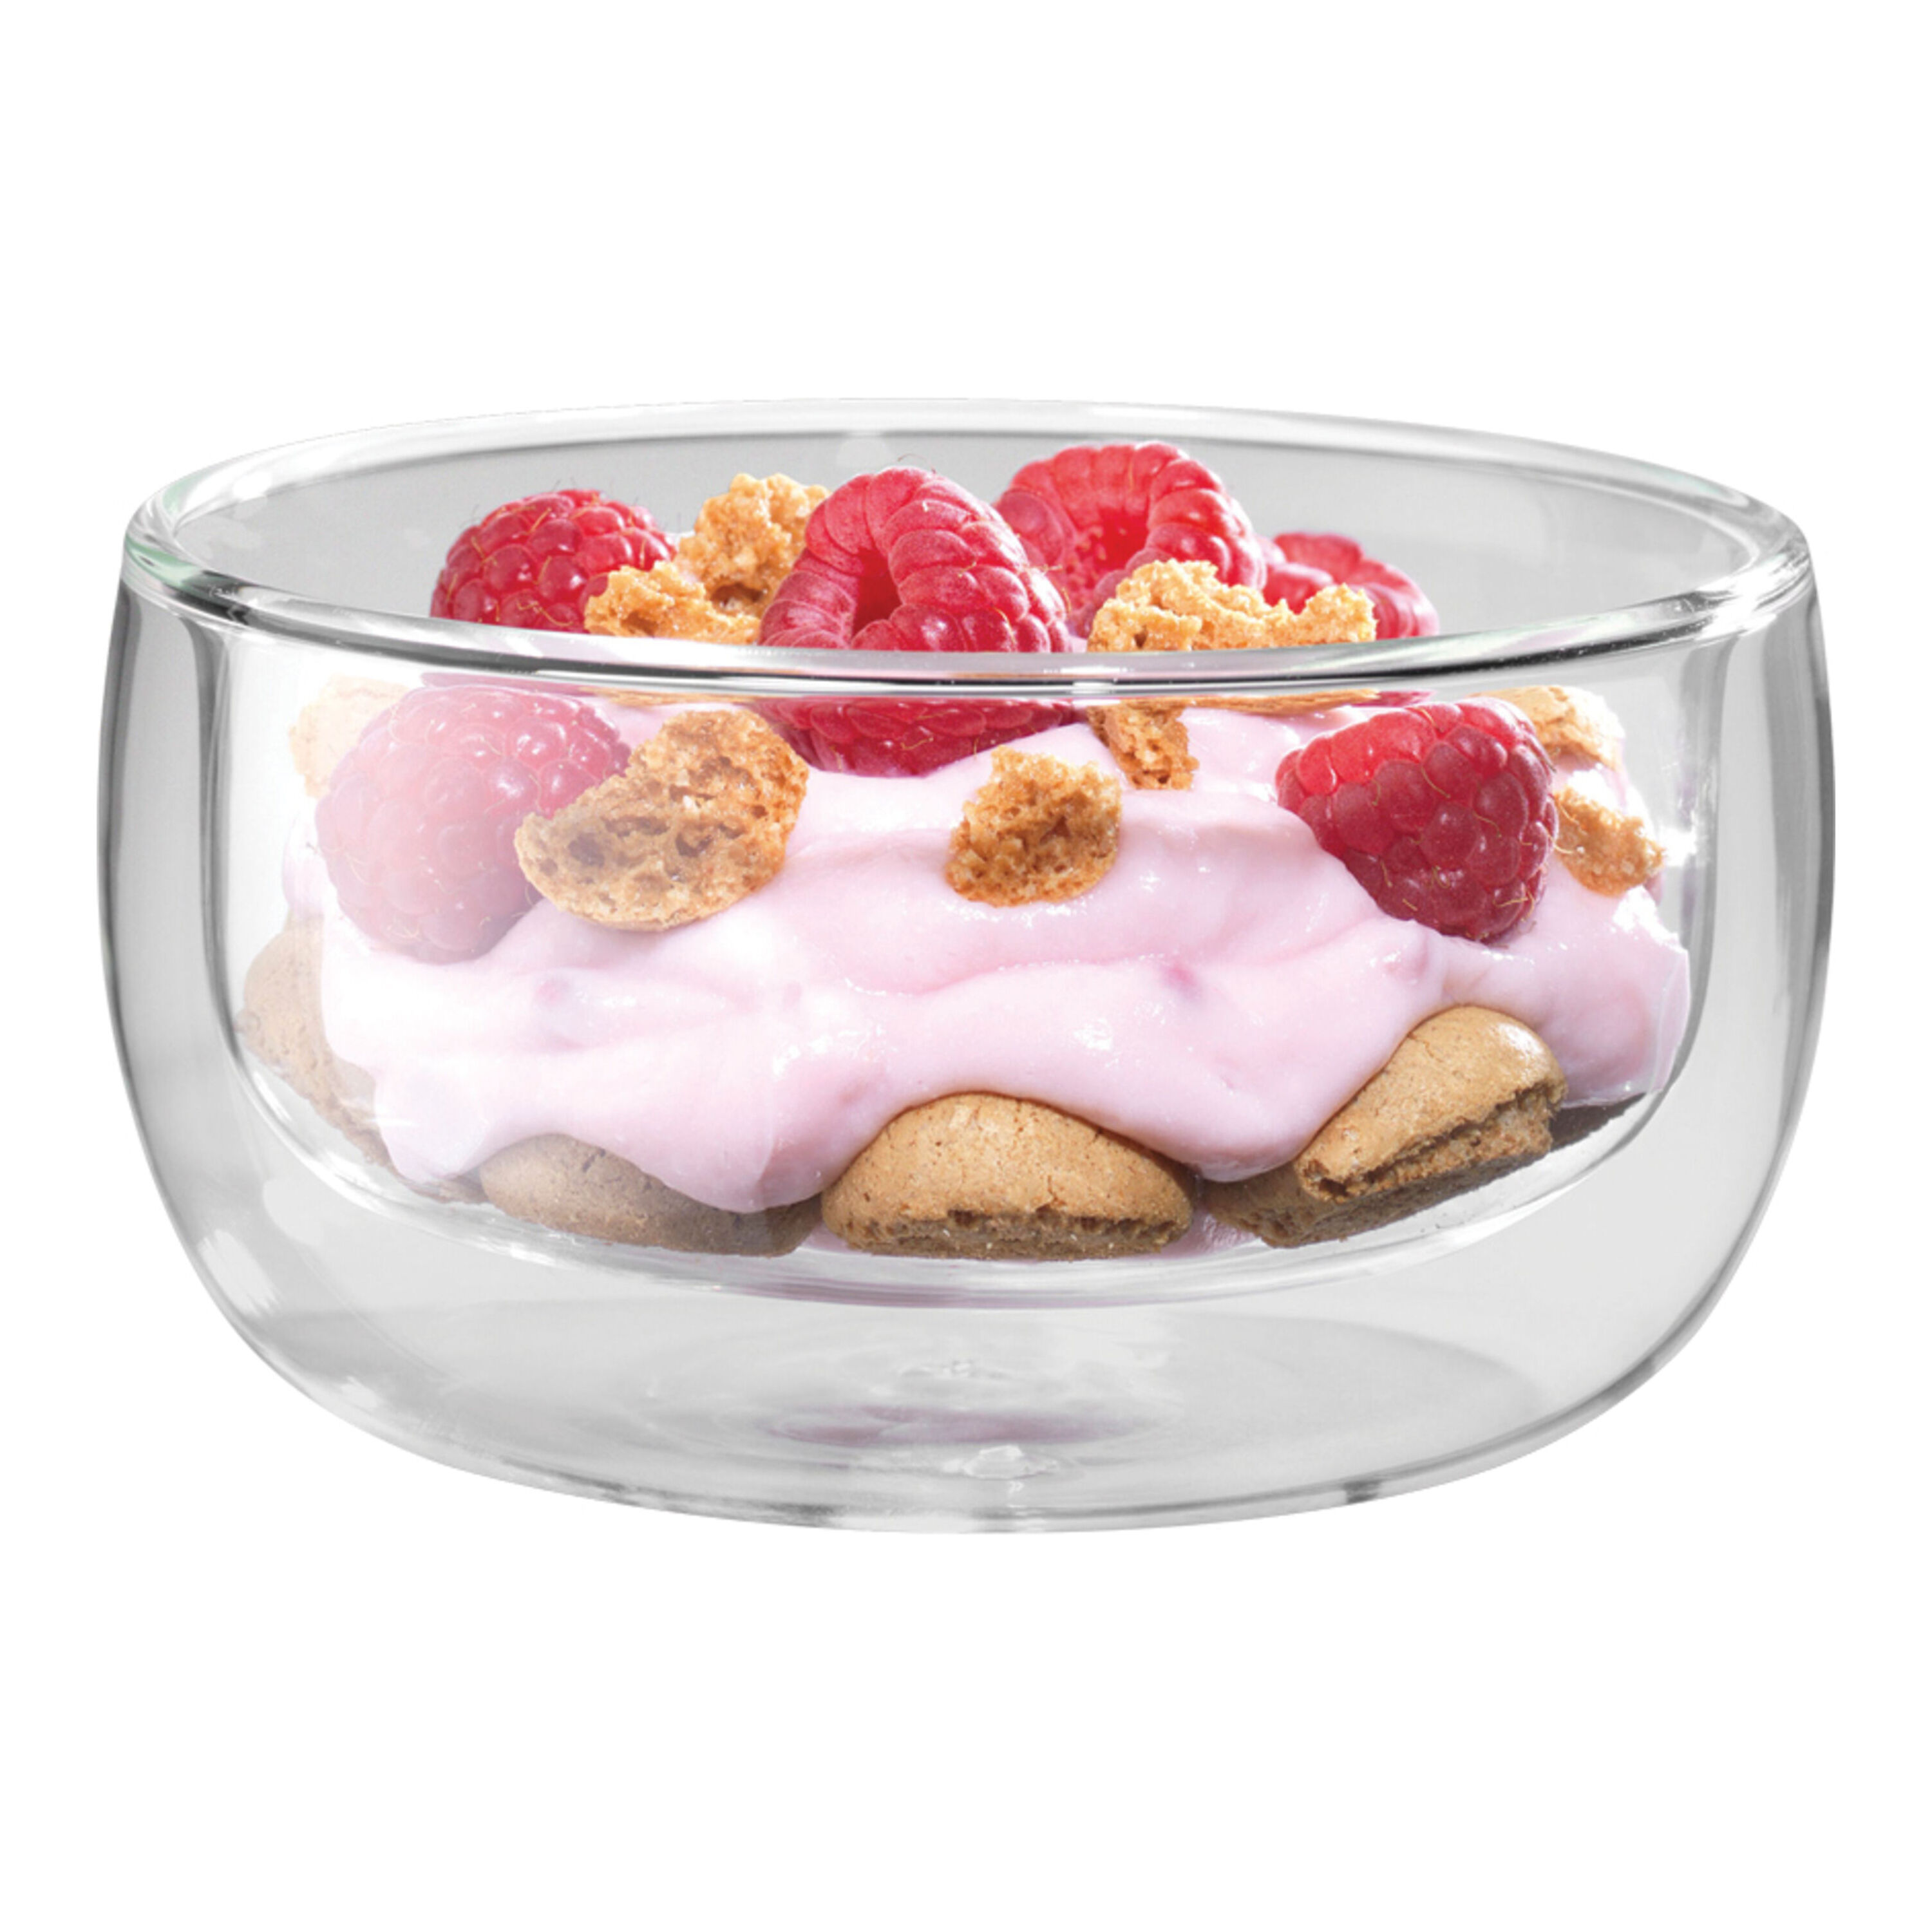 Double-Walled Glass Prep Bowls (Set of 4)